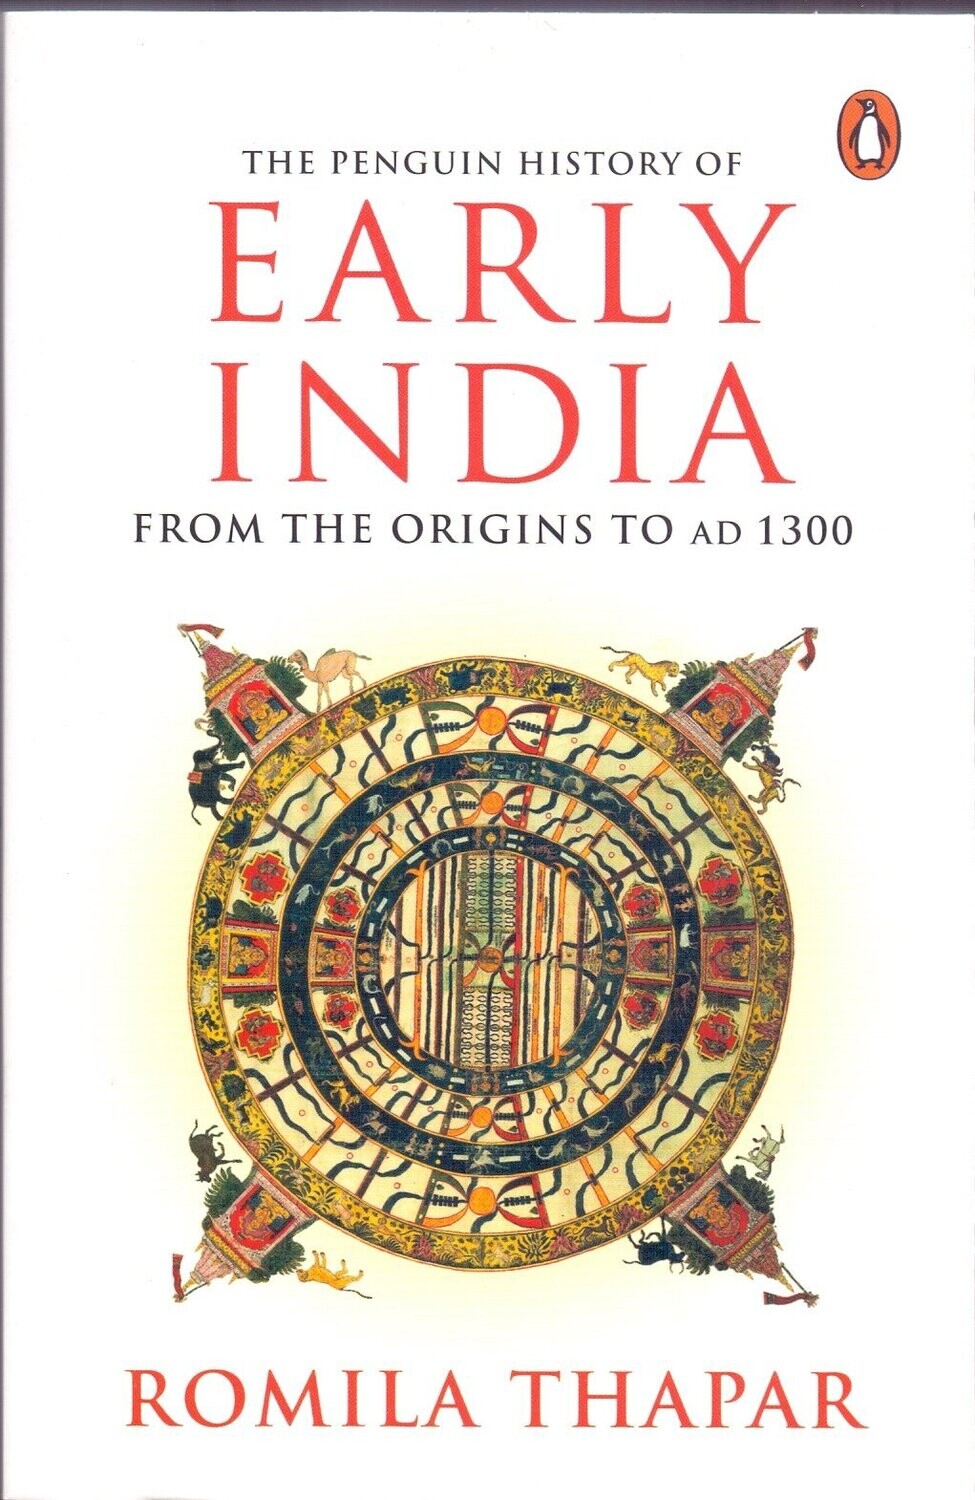 The Penguin History of Early India From the Origins to AD 1300 by Romila Thapar